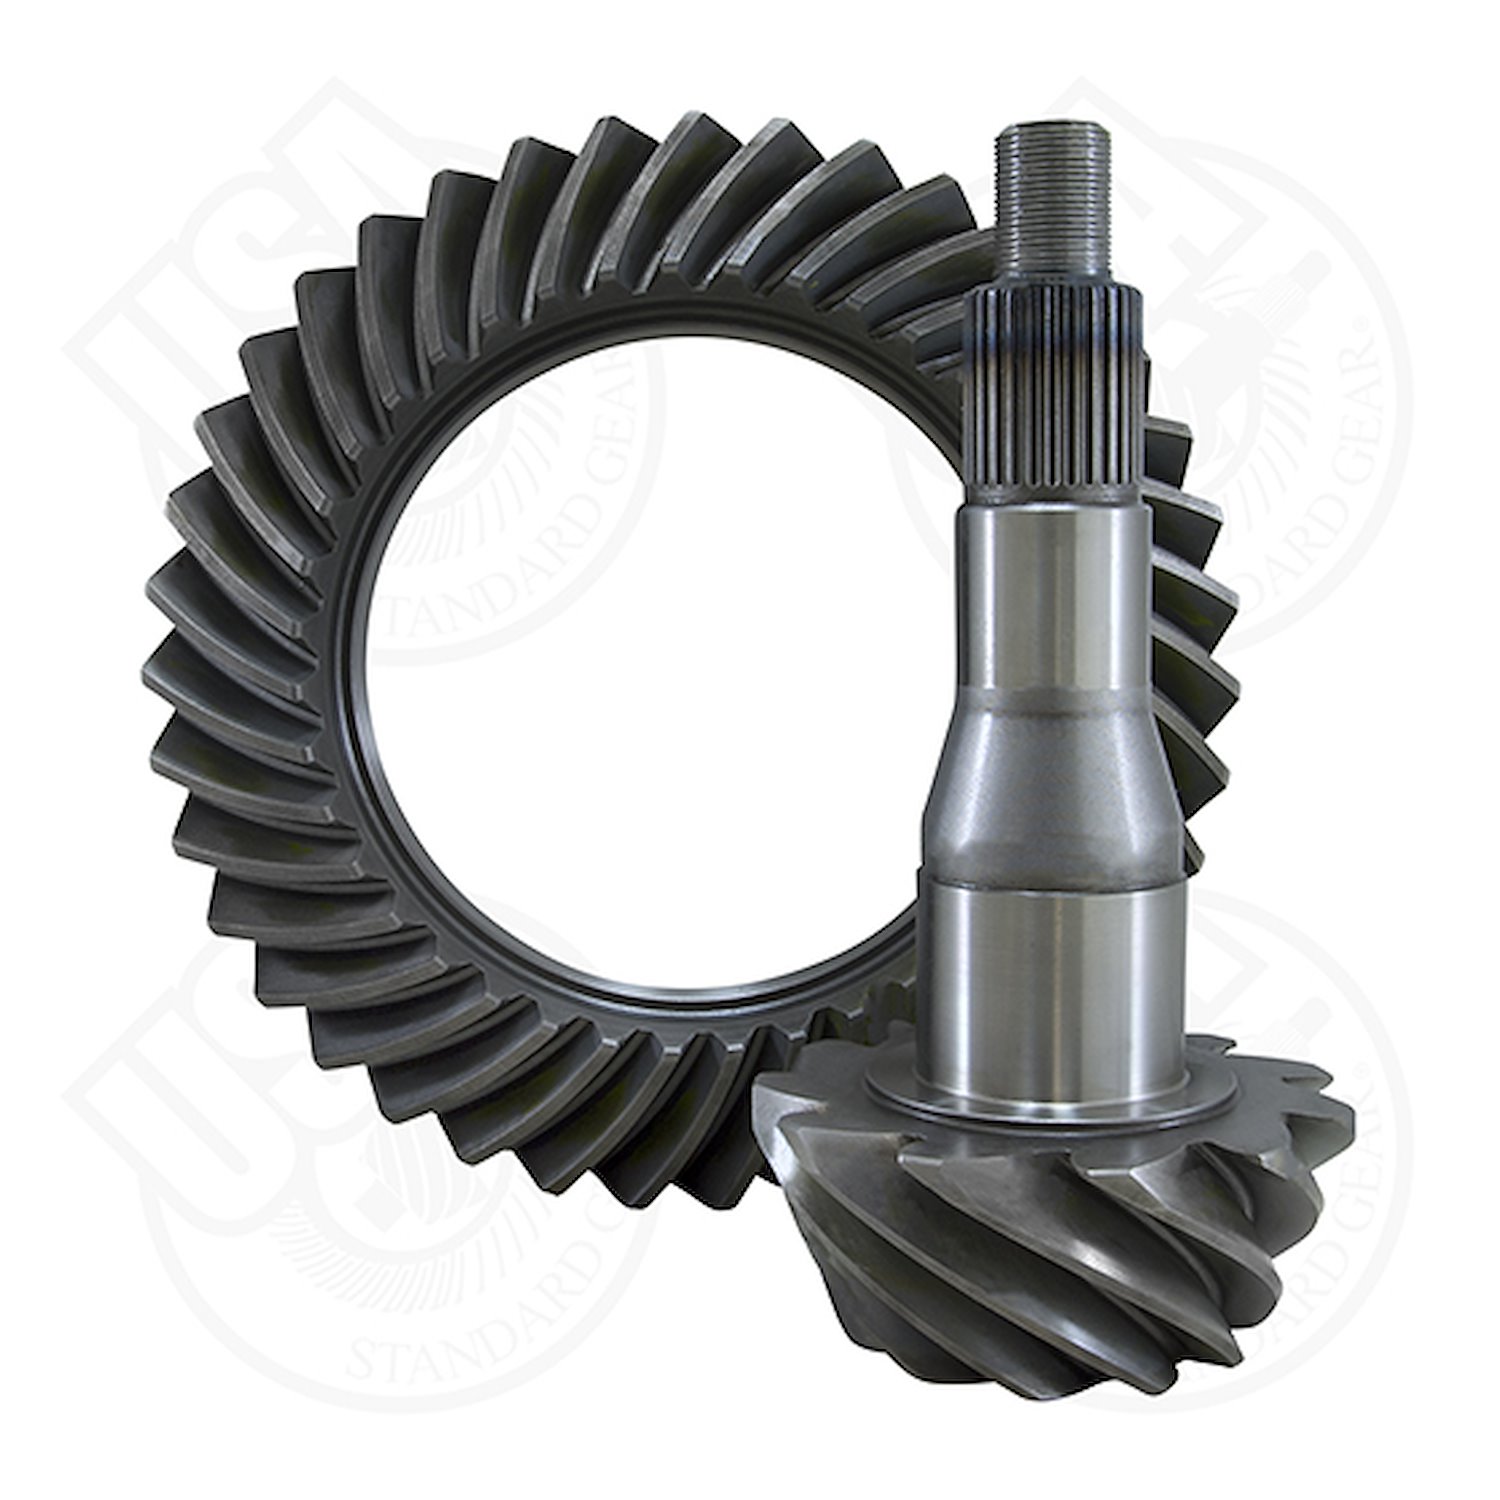 USA Standard Ring / Pinion 11 / up Ford 9.75 4.11 ratio